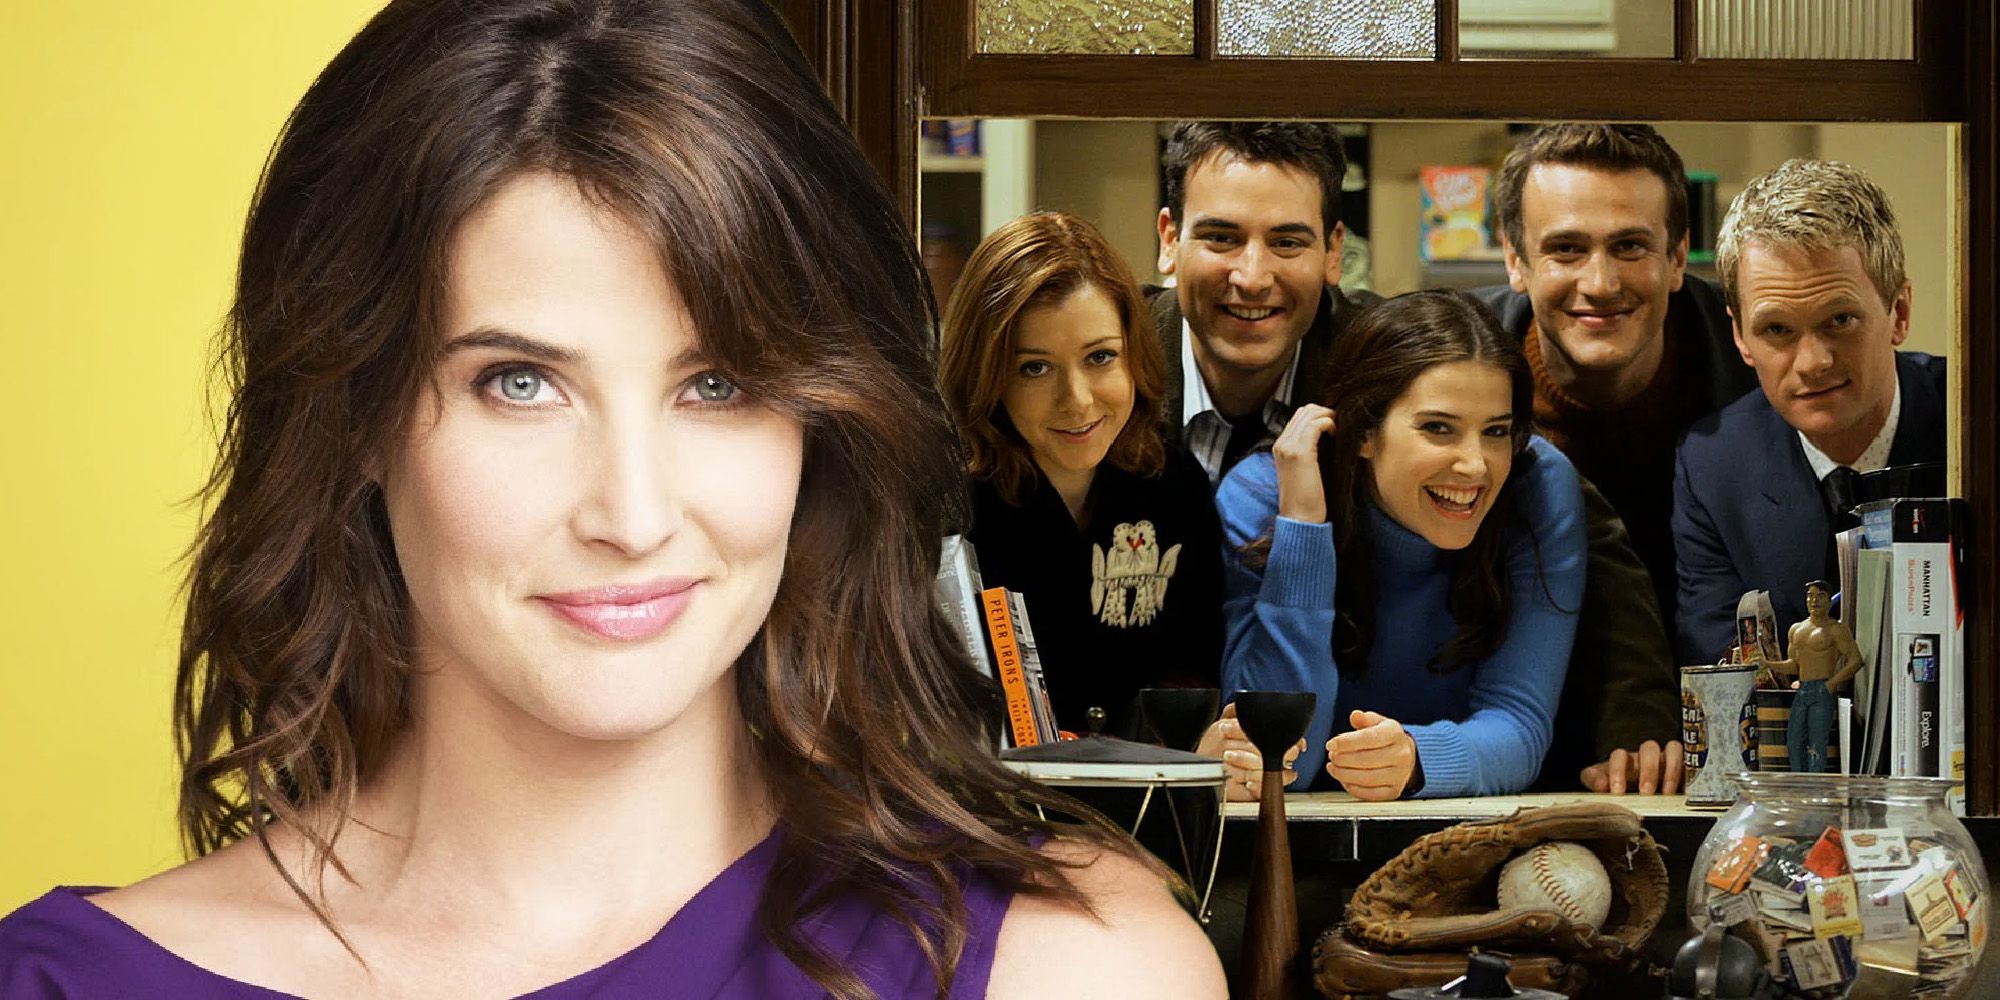 robin how i met your mother leaves group in future